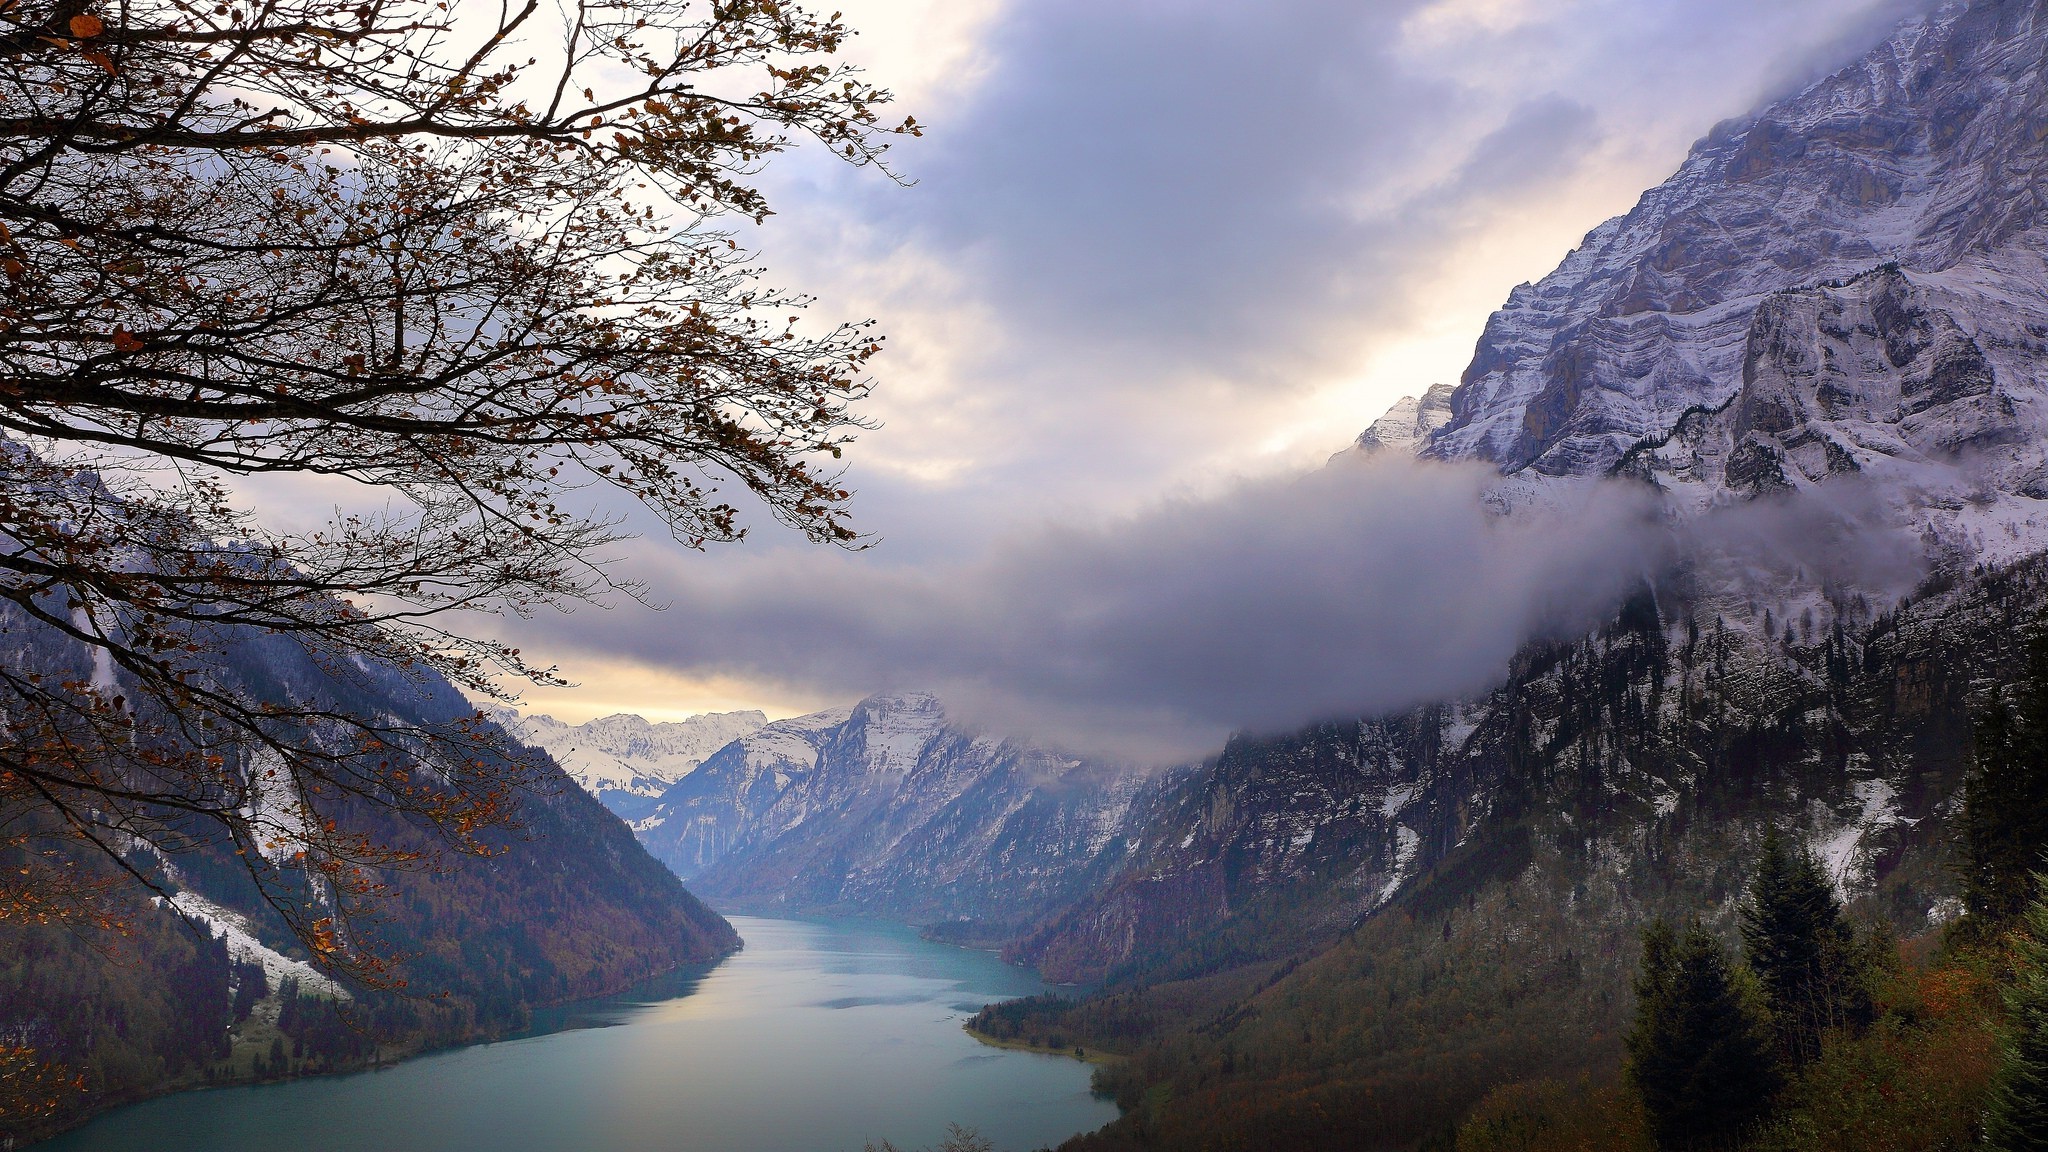 landscape, Nature, Lake, Mountains, Snowy Peak, Clouds, Trees, Fall, Alps, Switzerland Wallpaper